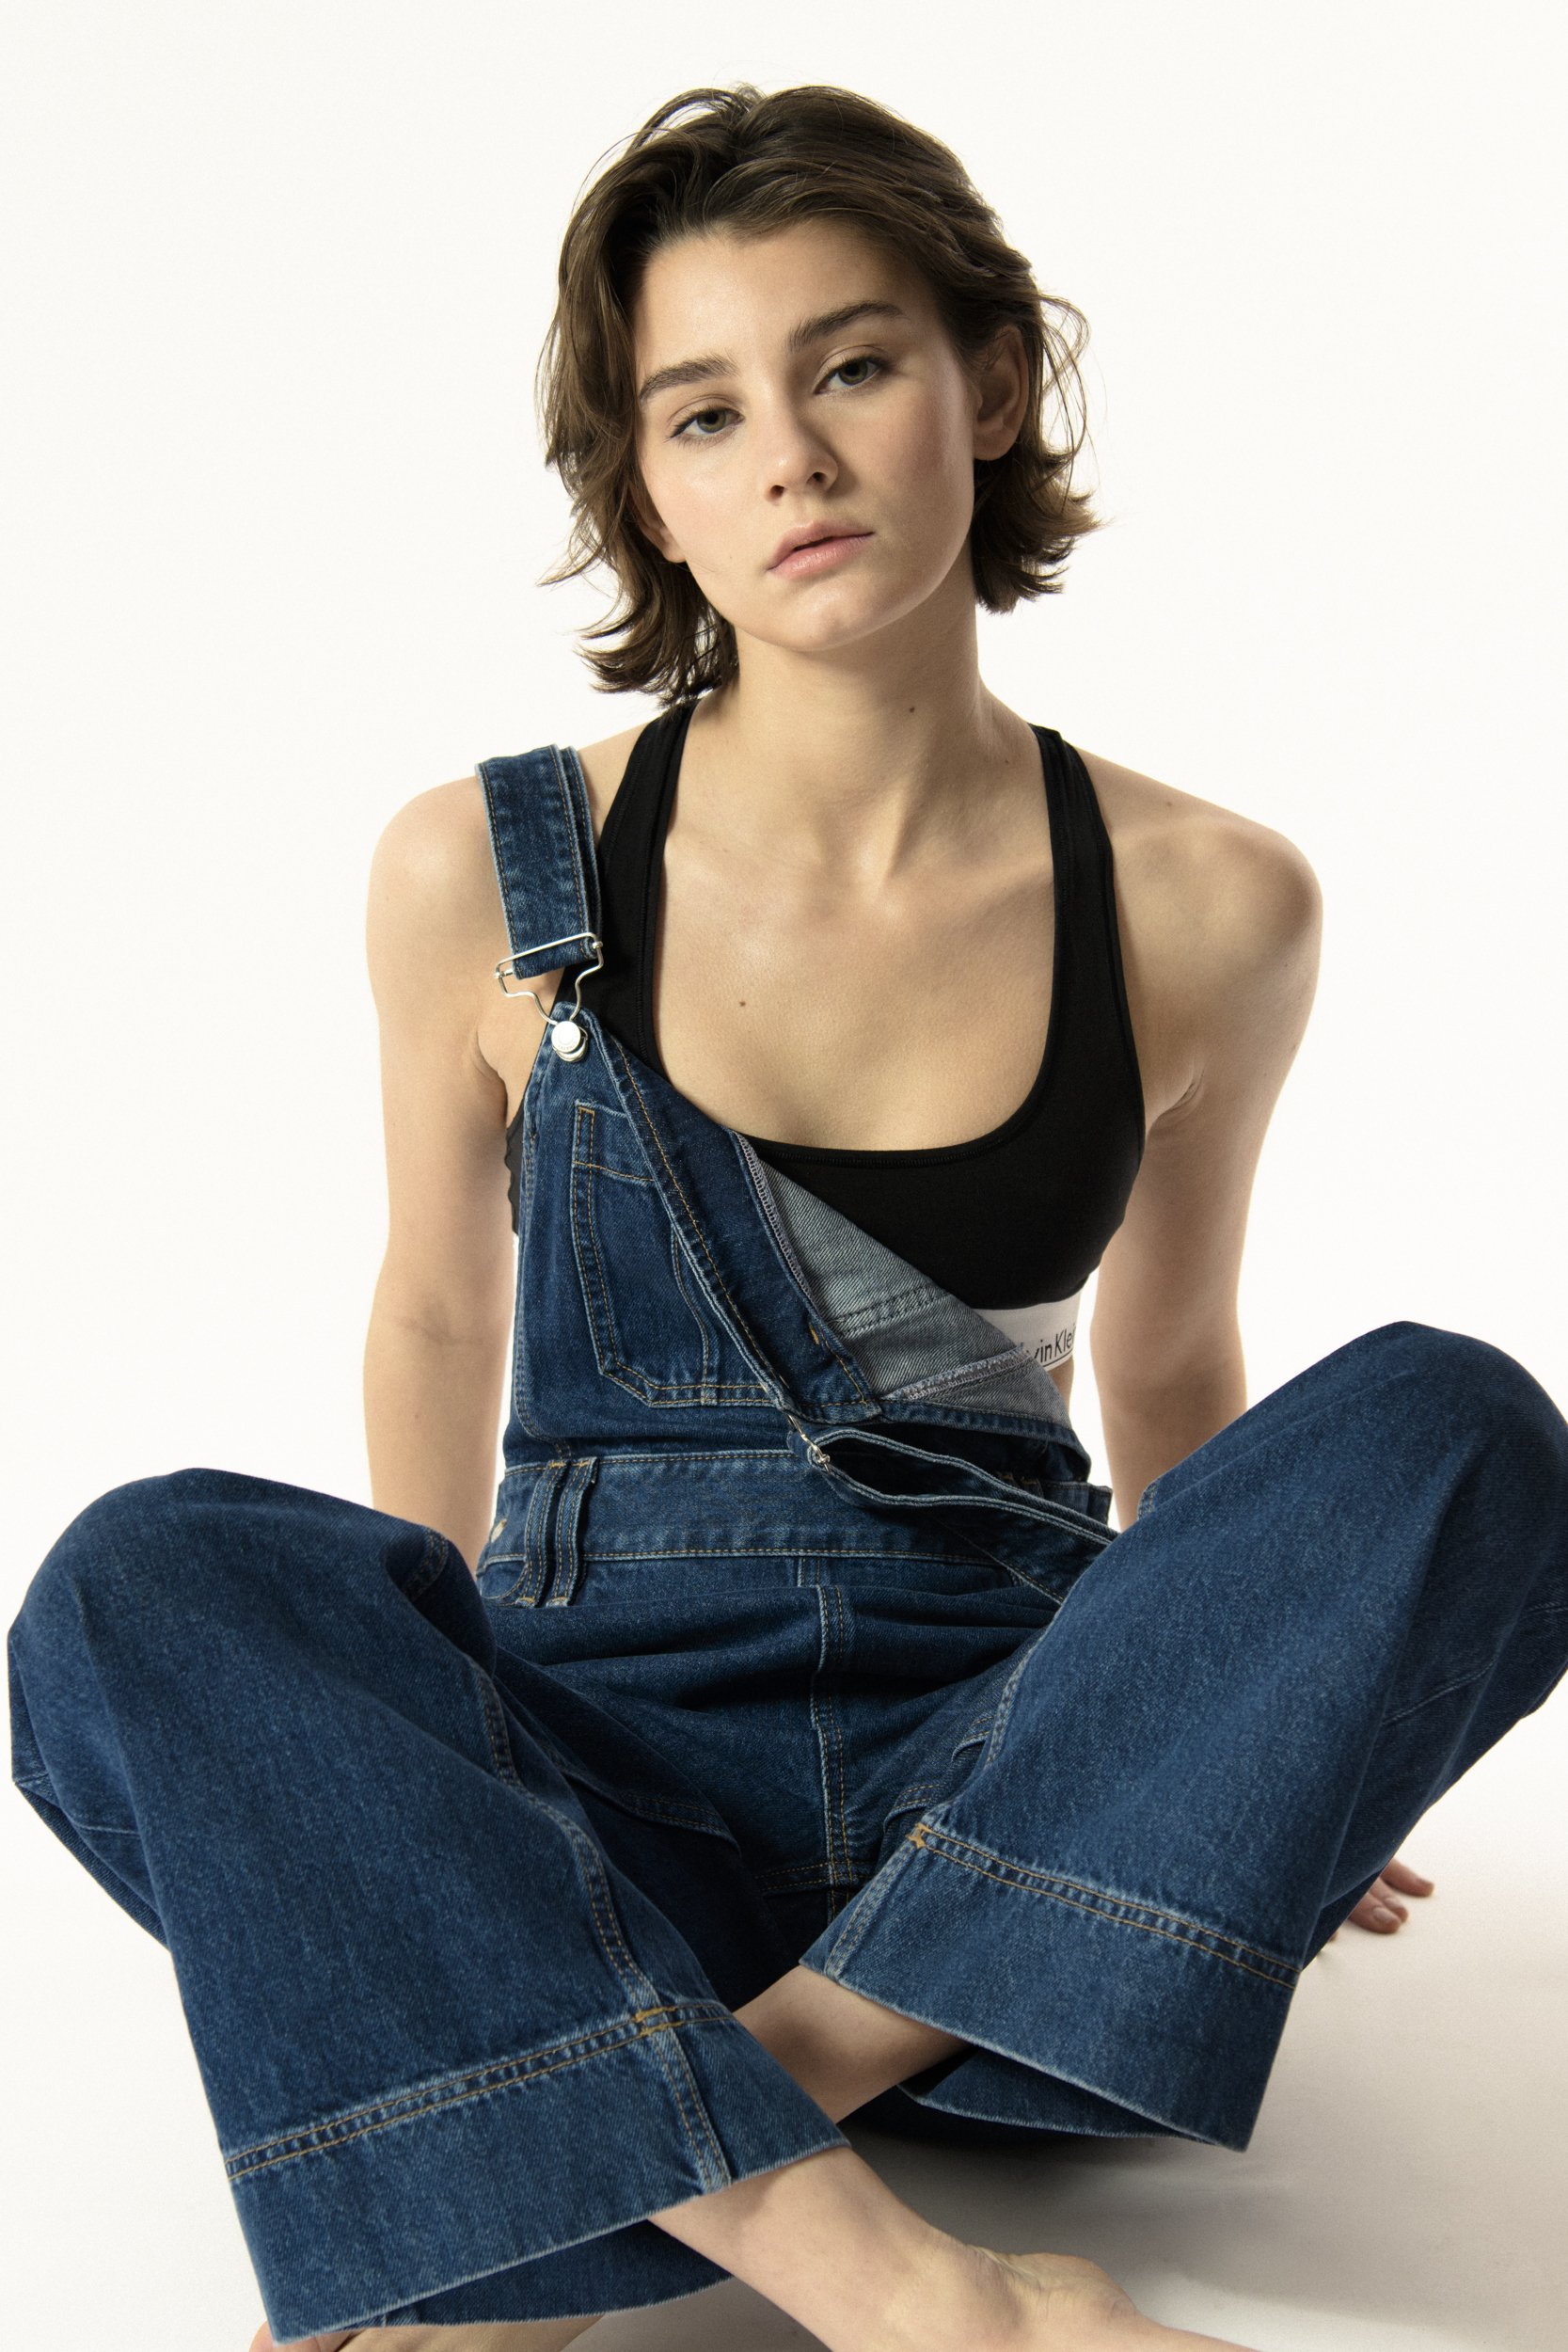 Model seating wearing jeans overalls